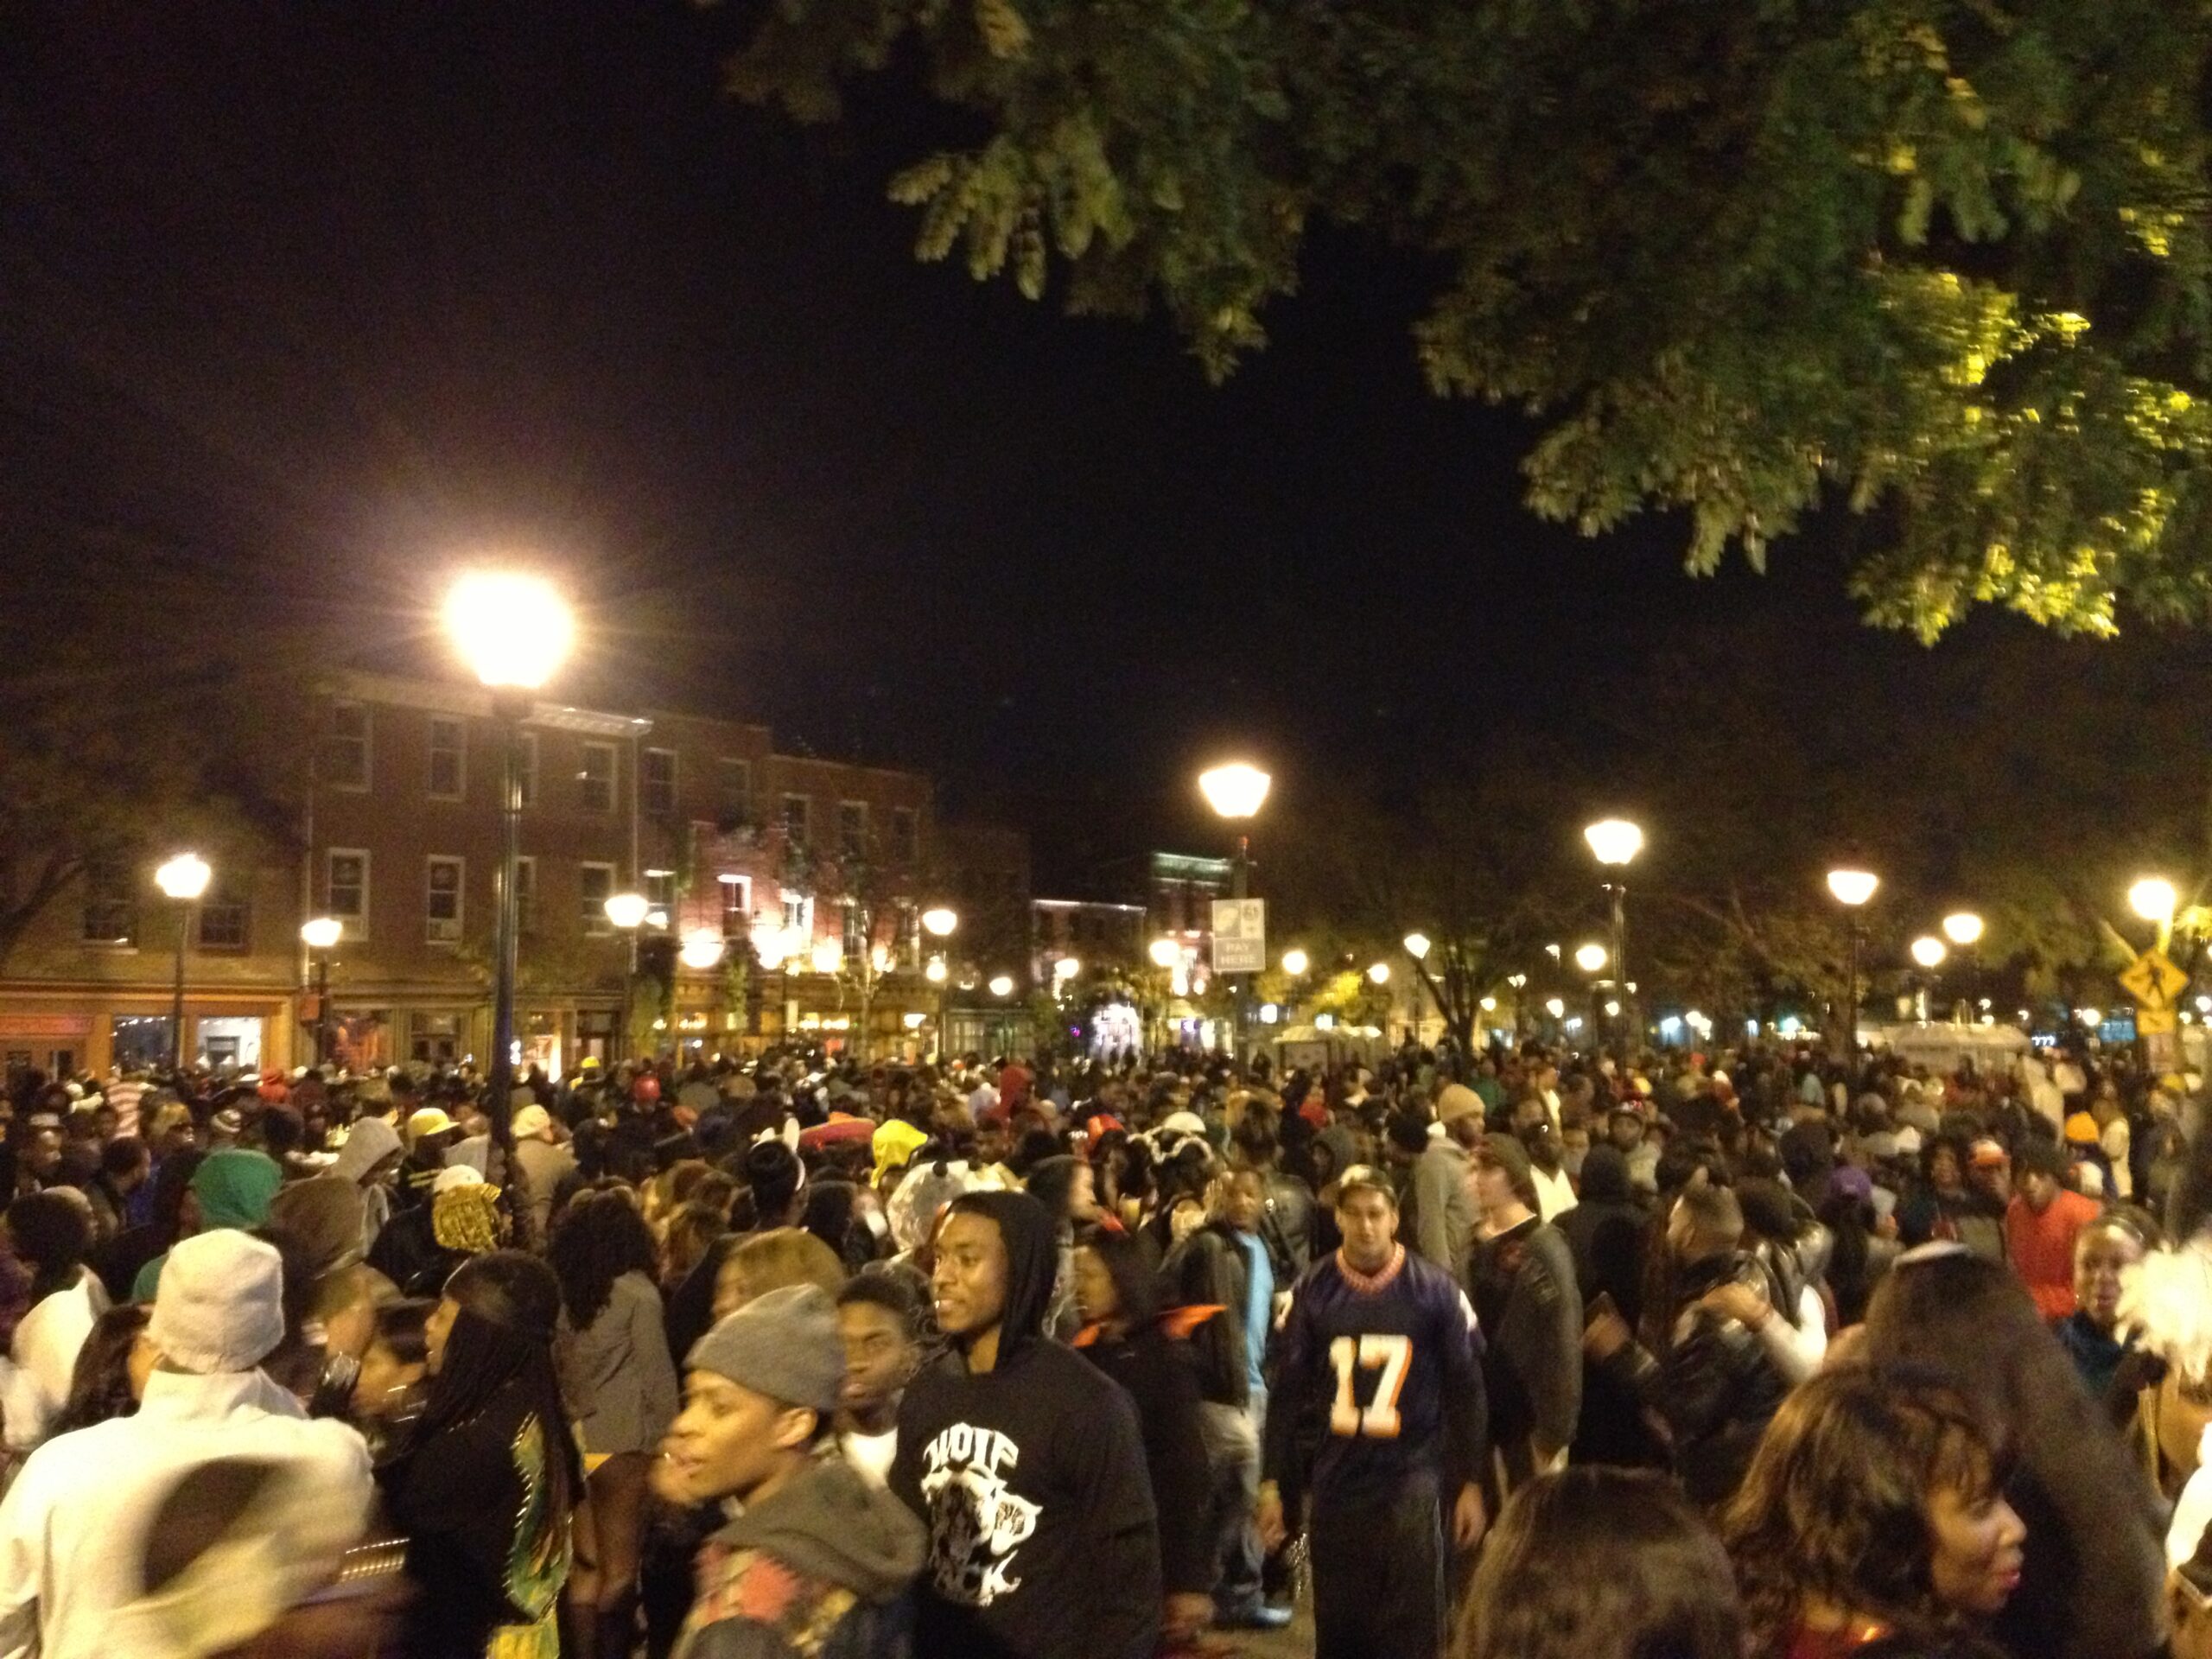 Thousands of people out in Fells Point for Halloween